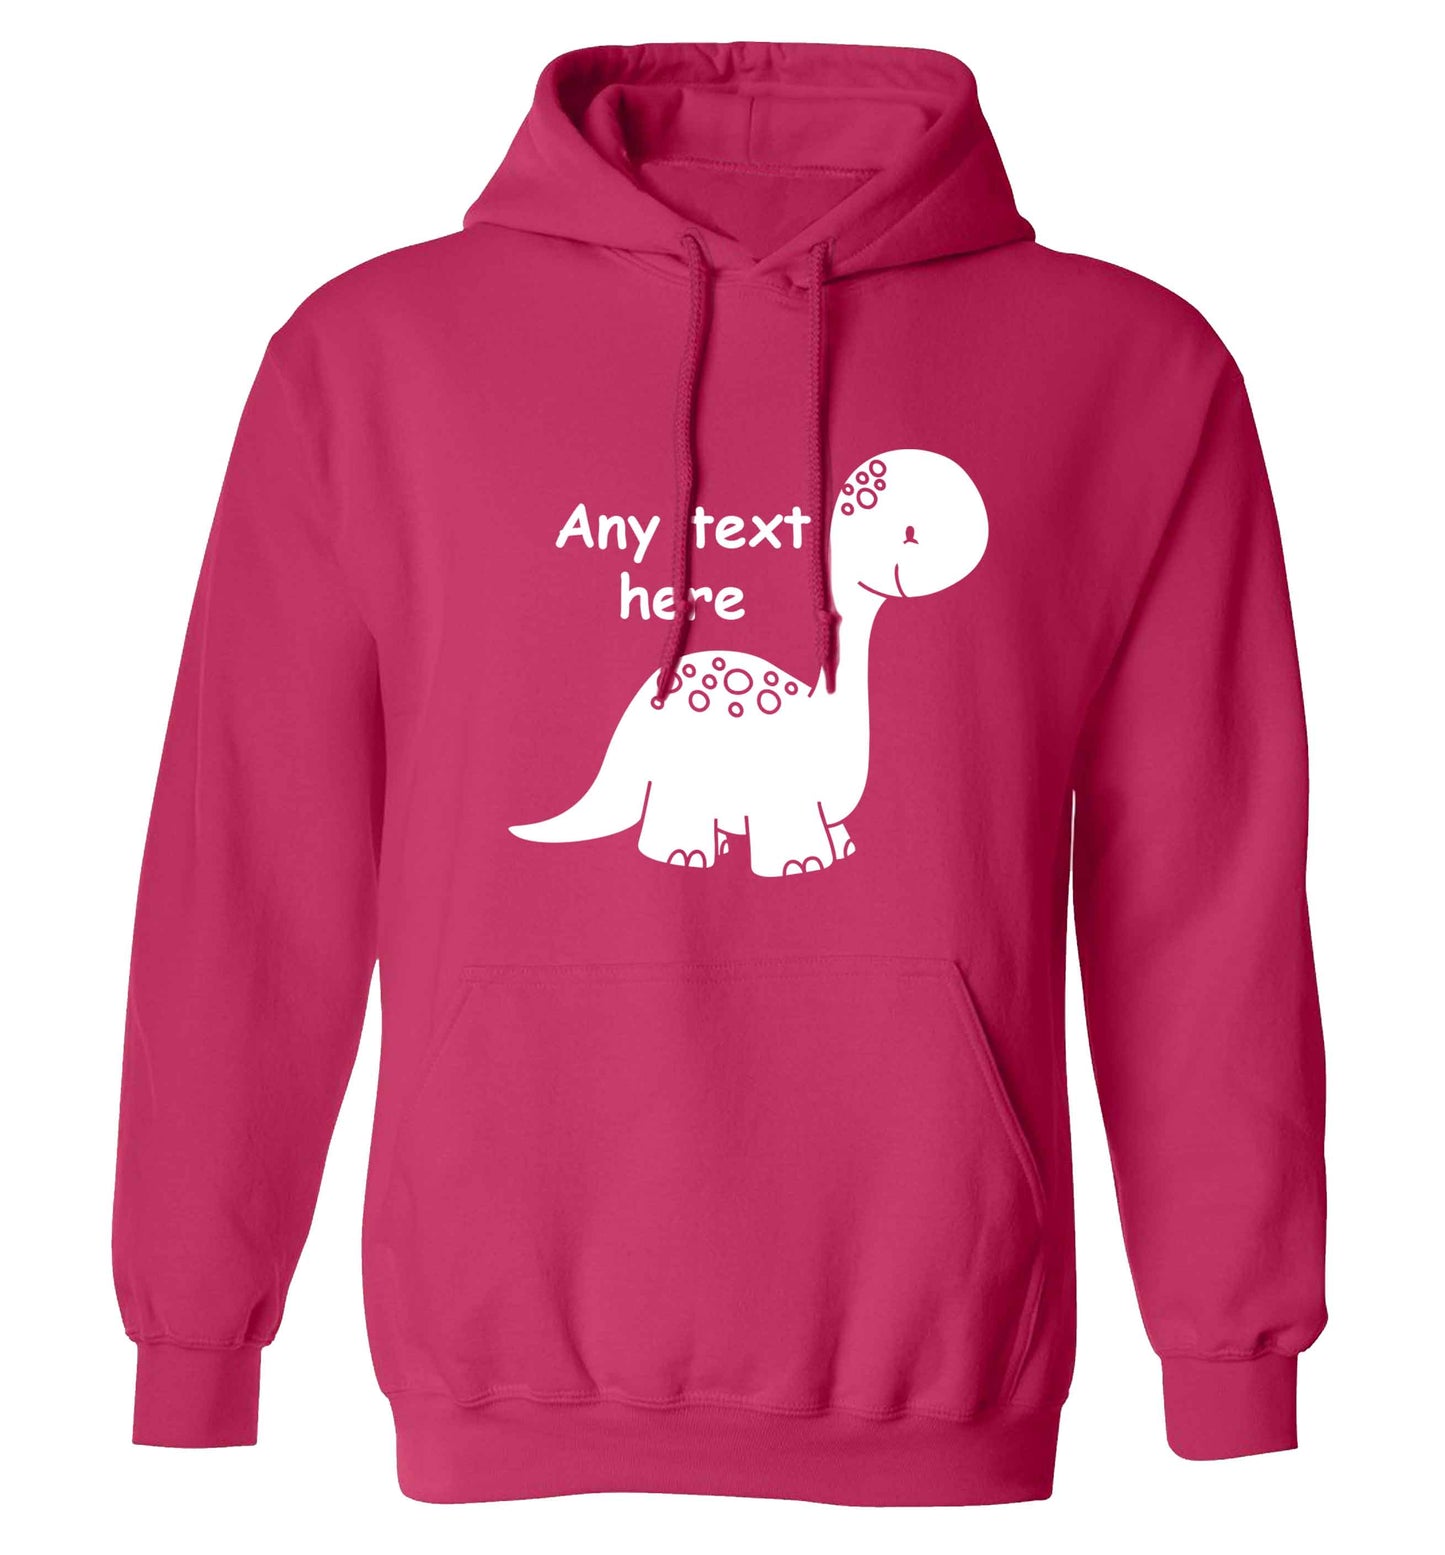 Dinosaur any text adults unisex pink hoodie 2XL